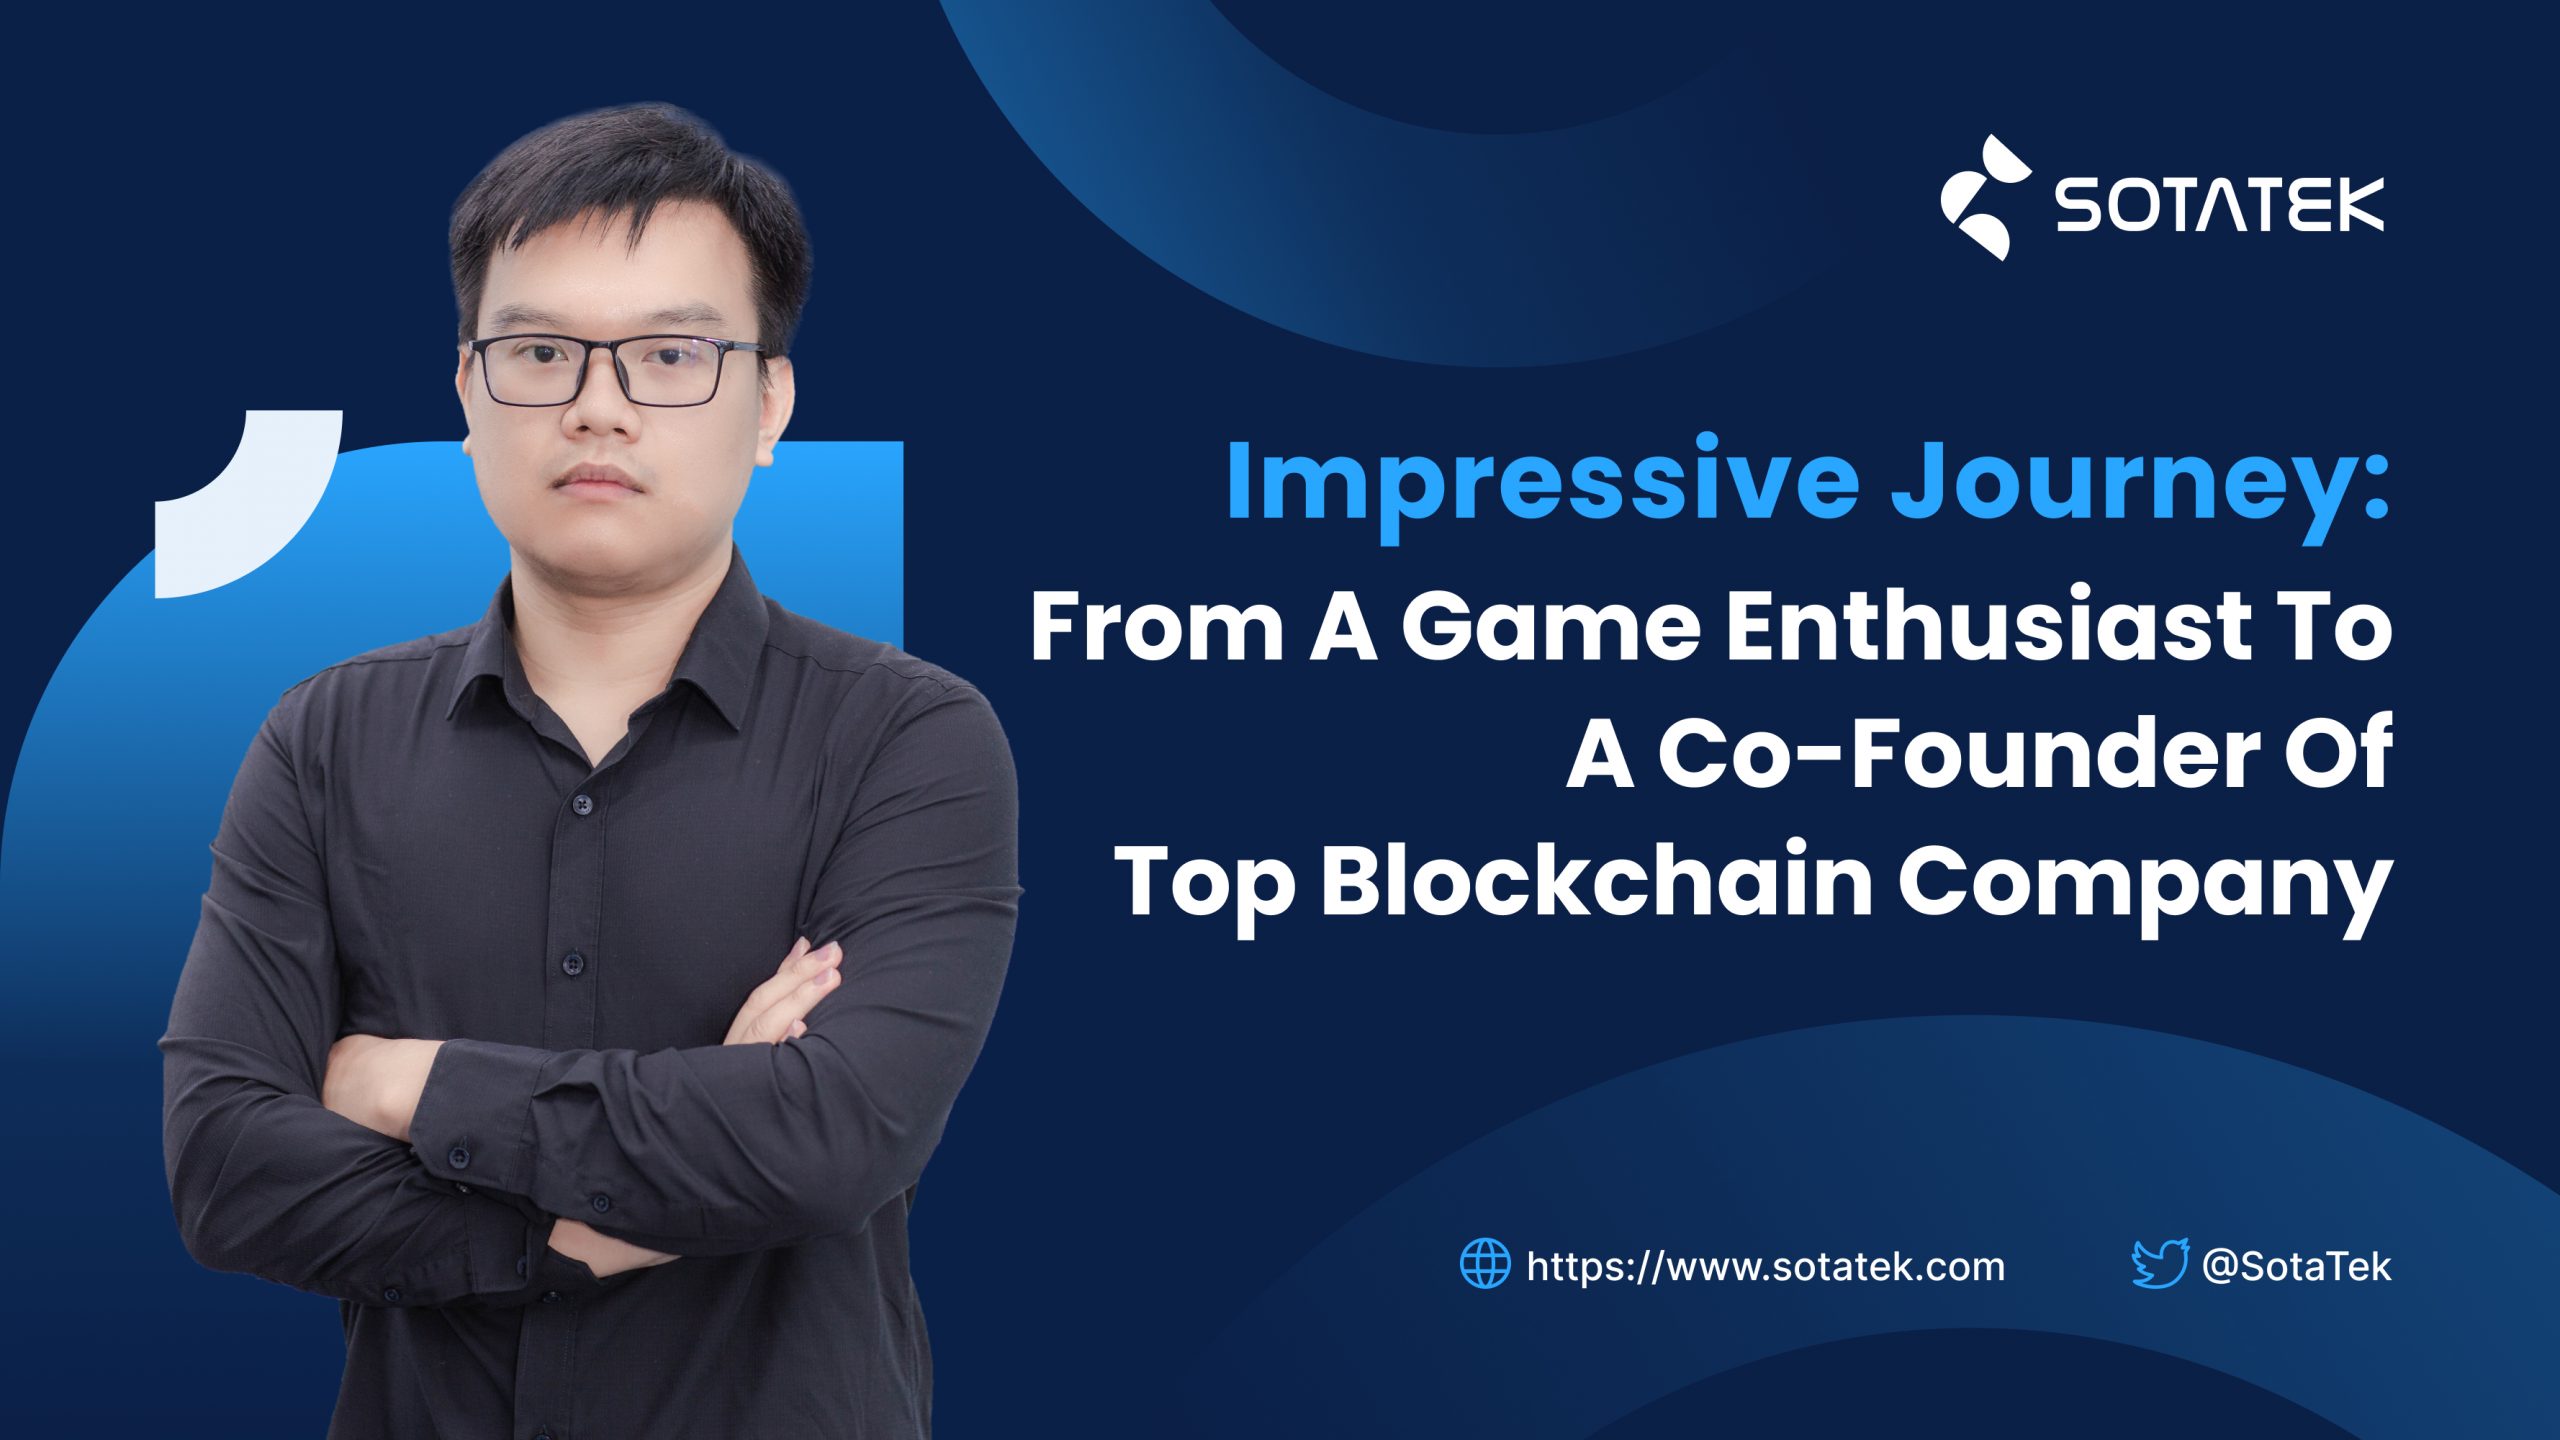 Impressive-Journey-From-A-Game-Enthusiast-To-A-Co-Founder-of-Top-Blockchain-Development-Company